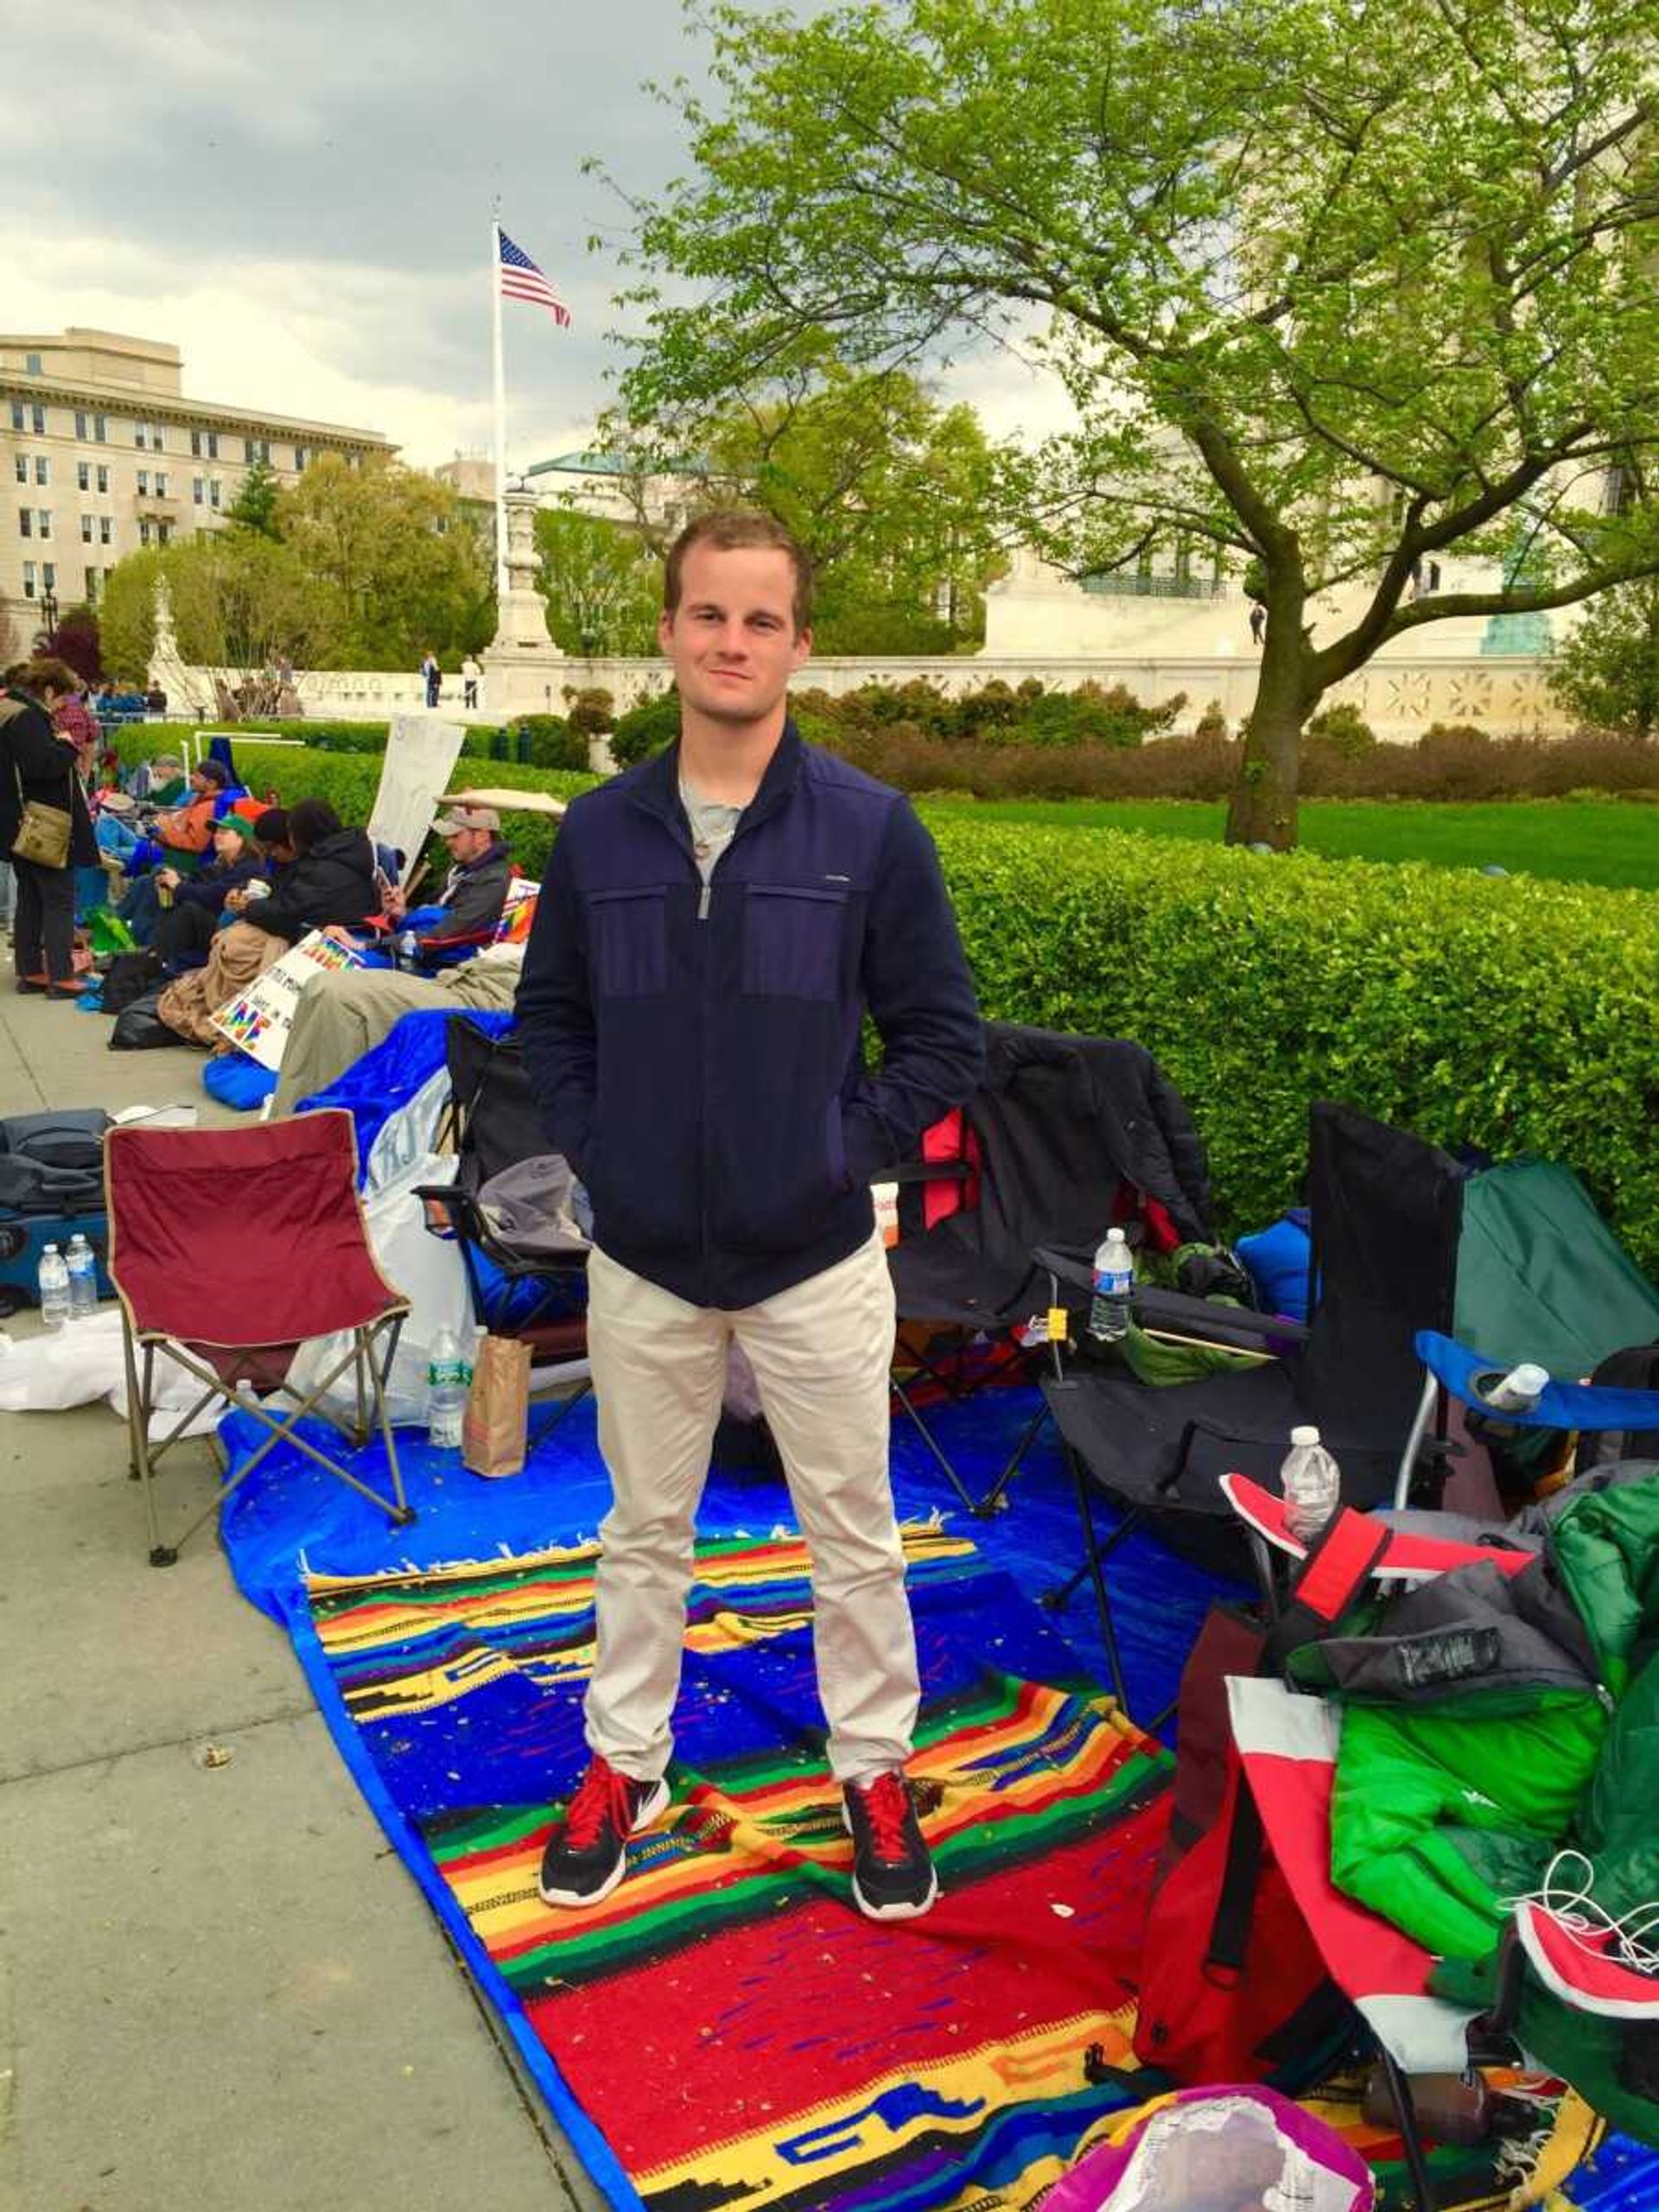 Nick Maddock standing in front of the Supreme Court waiting in line. Submitted photo.